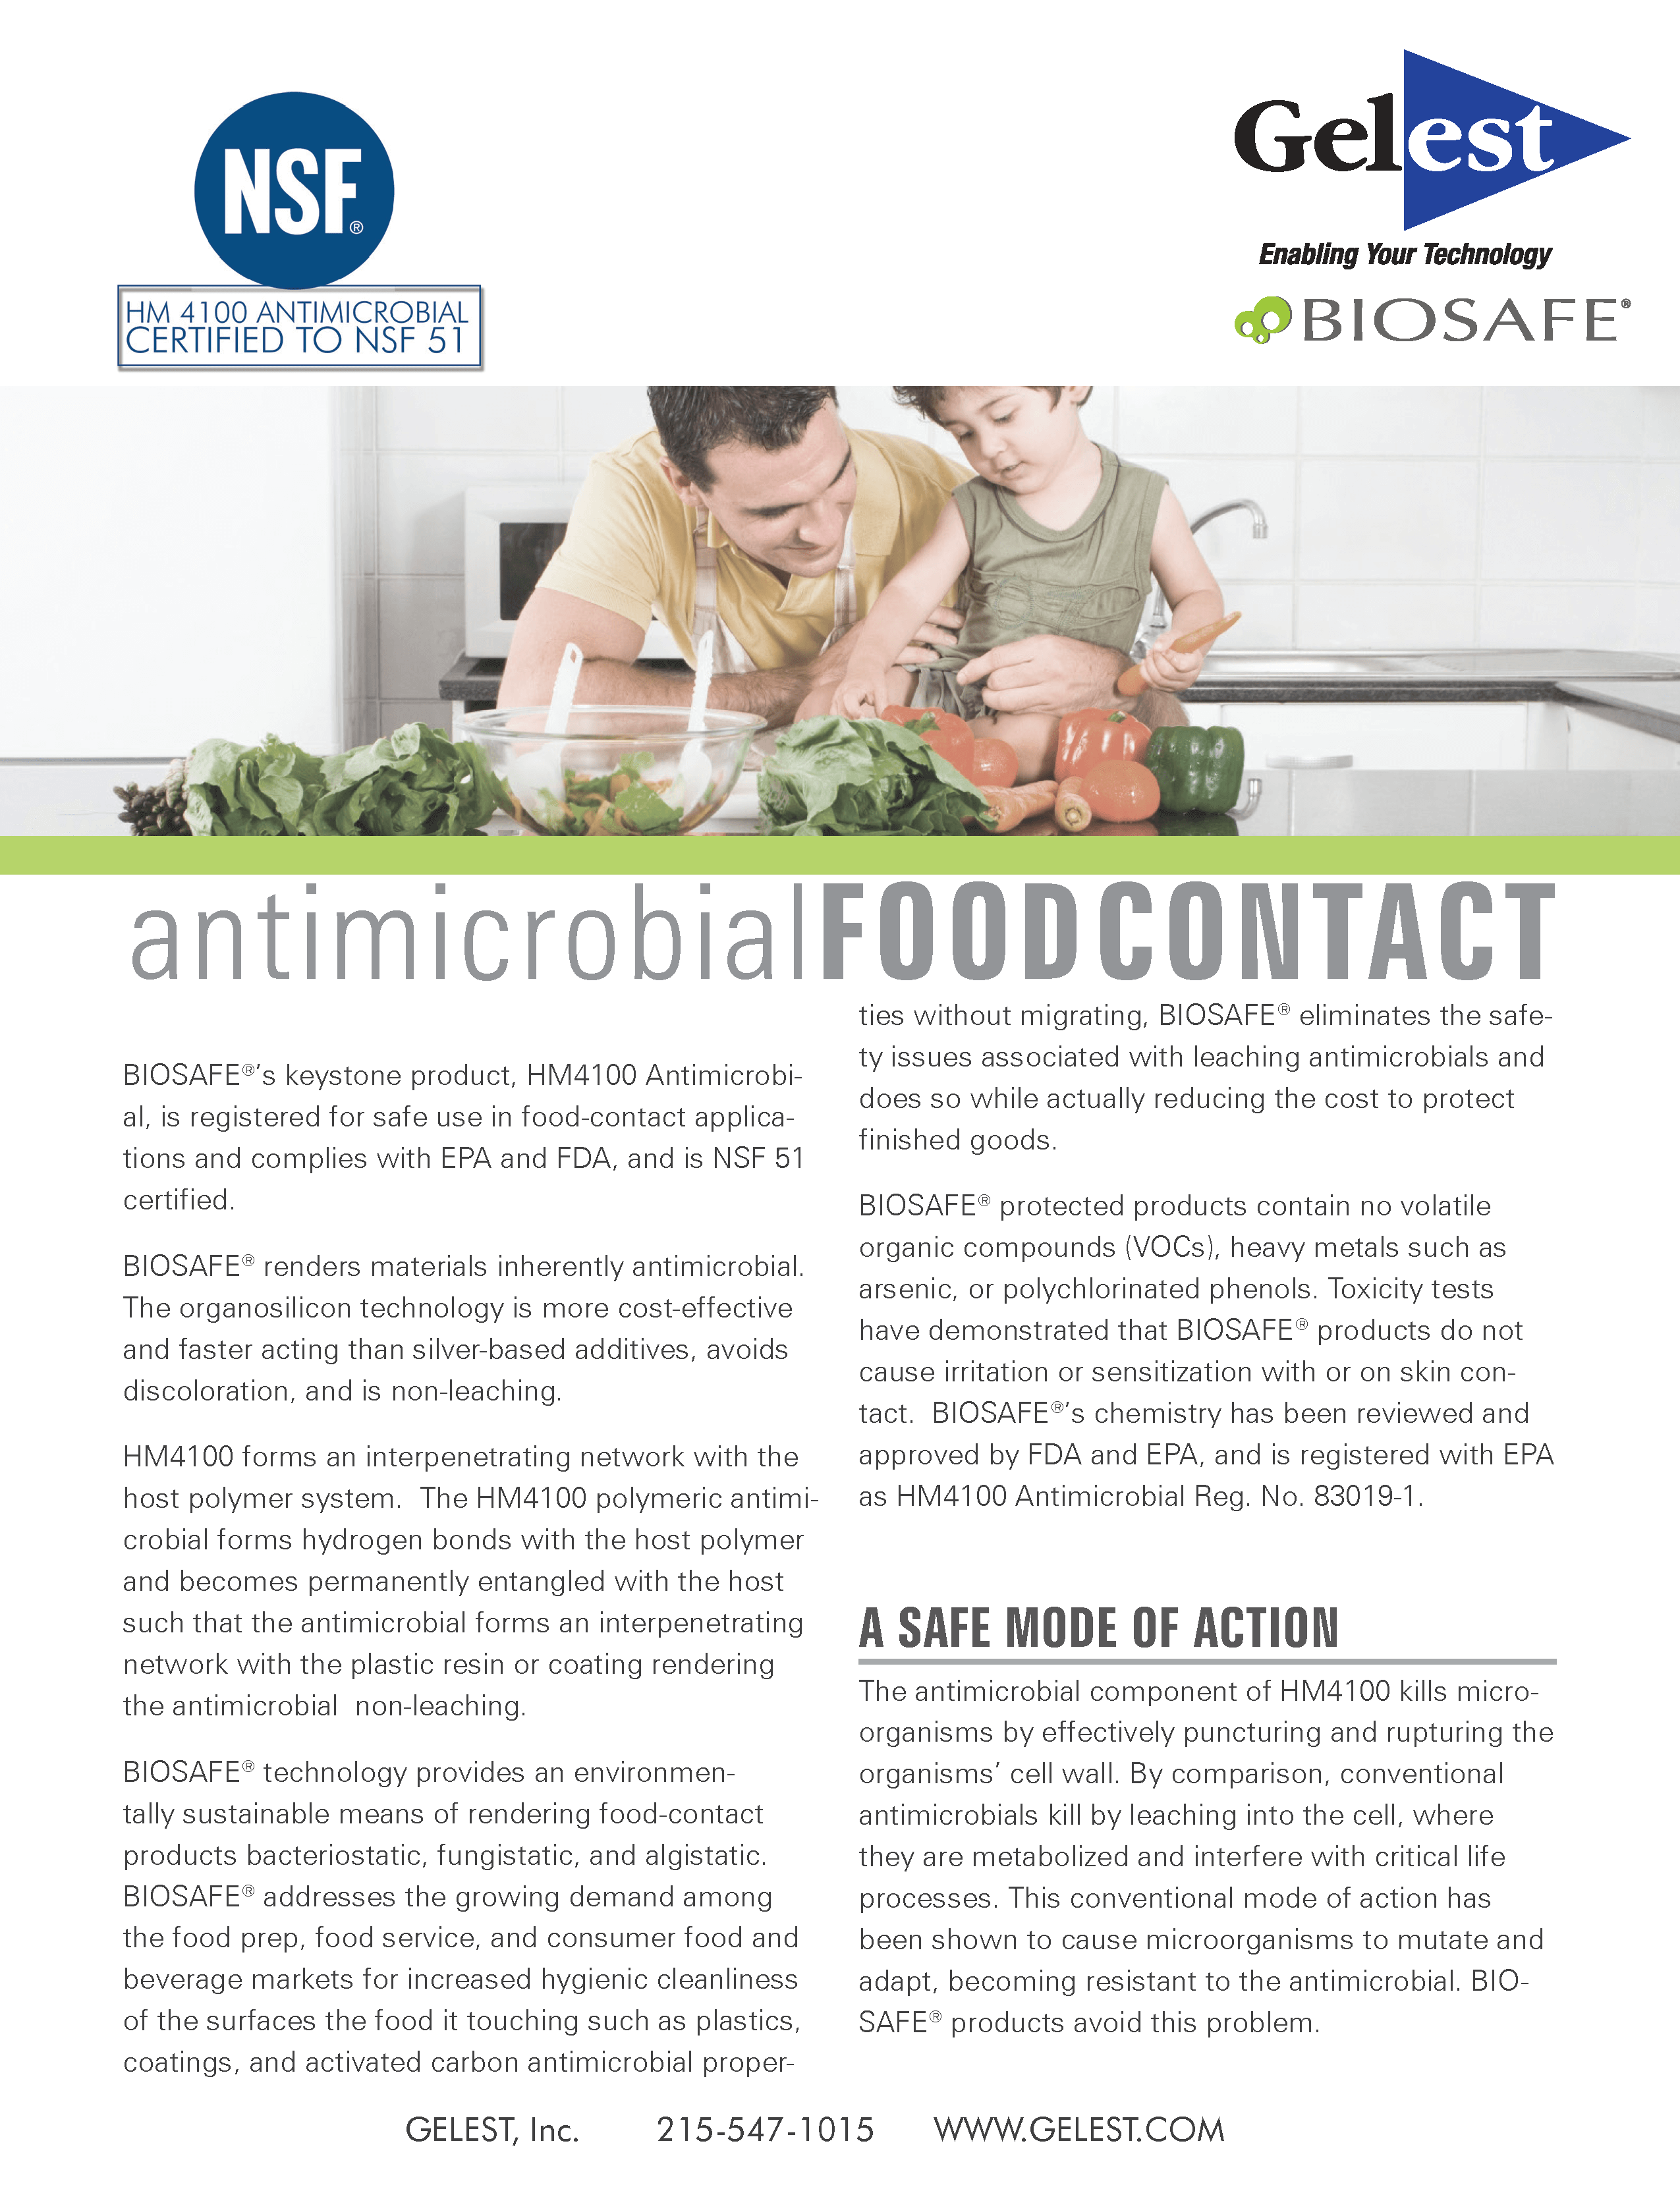 BIOSAFE® Food Contact Guidelines